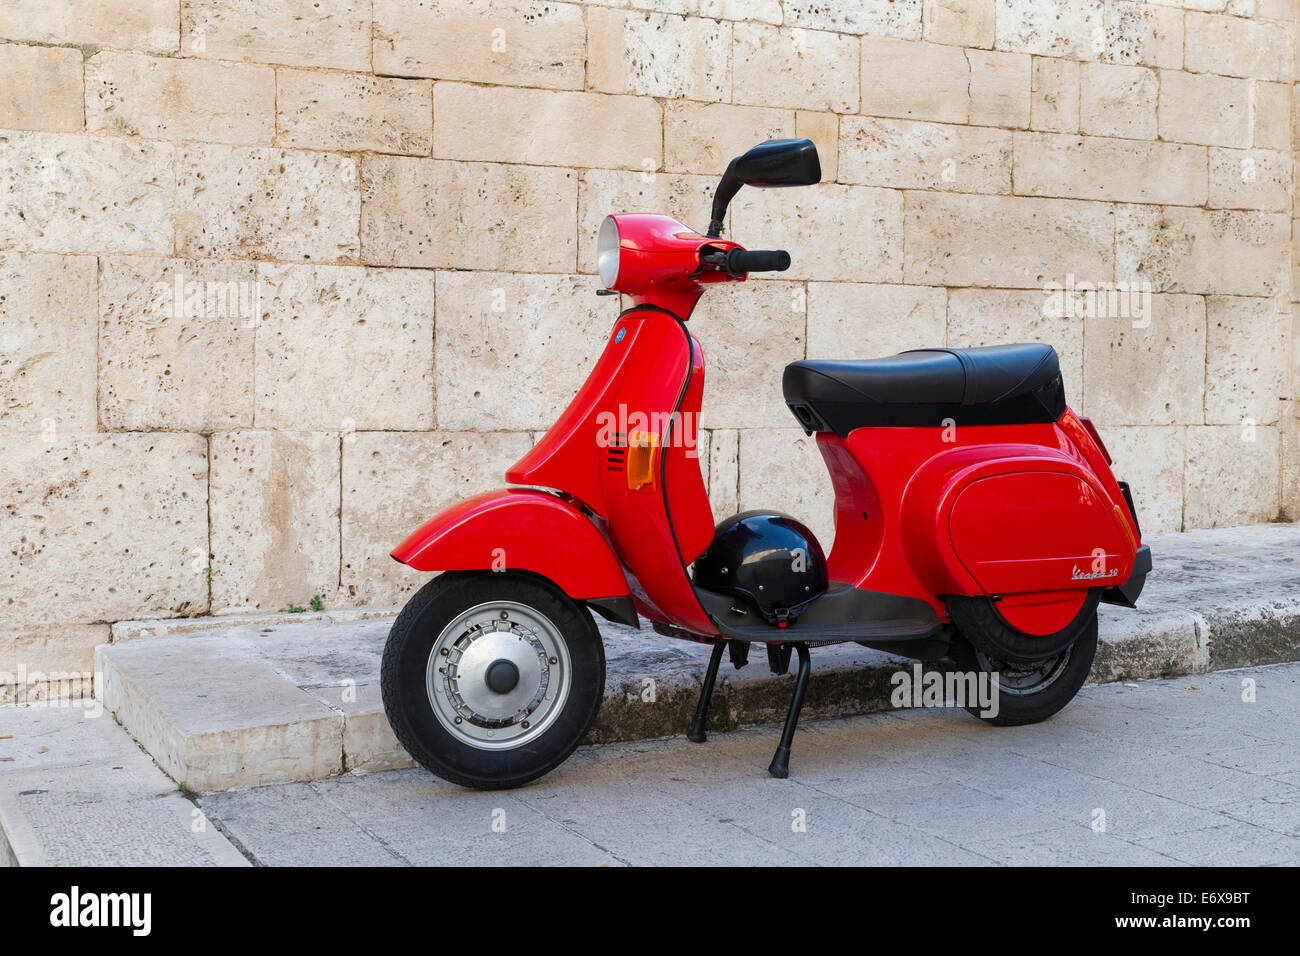 Vespa 50, red scooter with helmet parked in front of a wall, Alberobello, Apulia, Italy Stock Photo